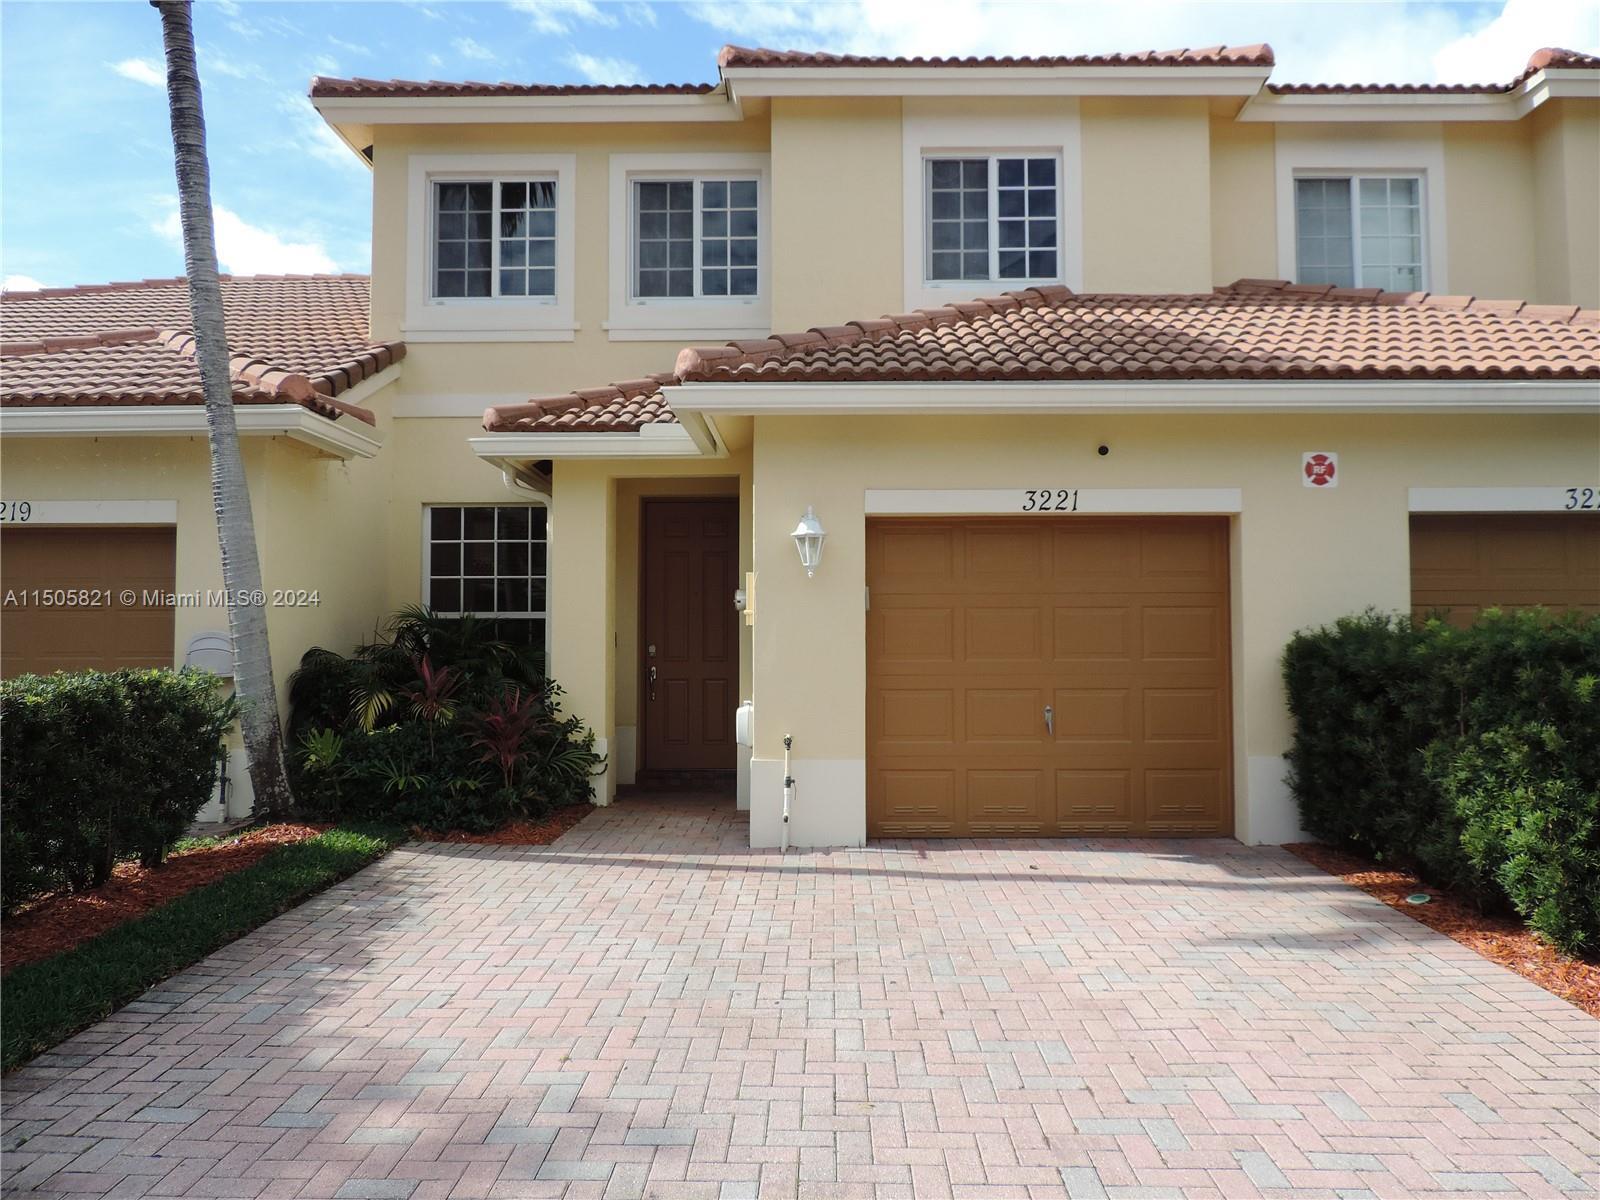 Photo of 3221 NW 32nd Ter in Oakland Park, FL